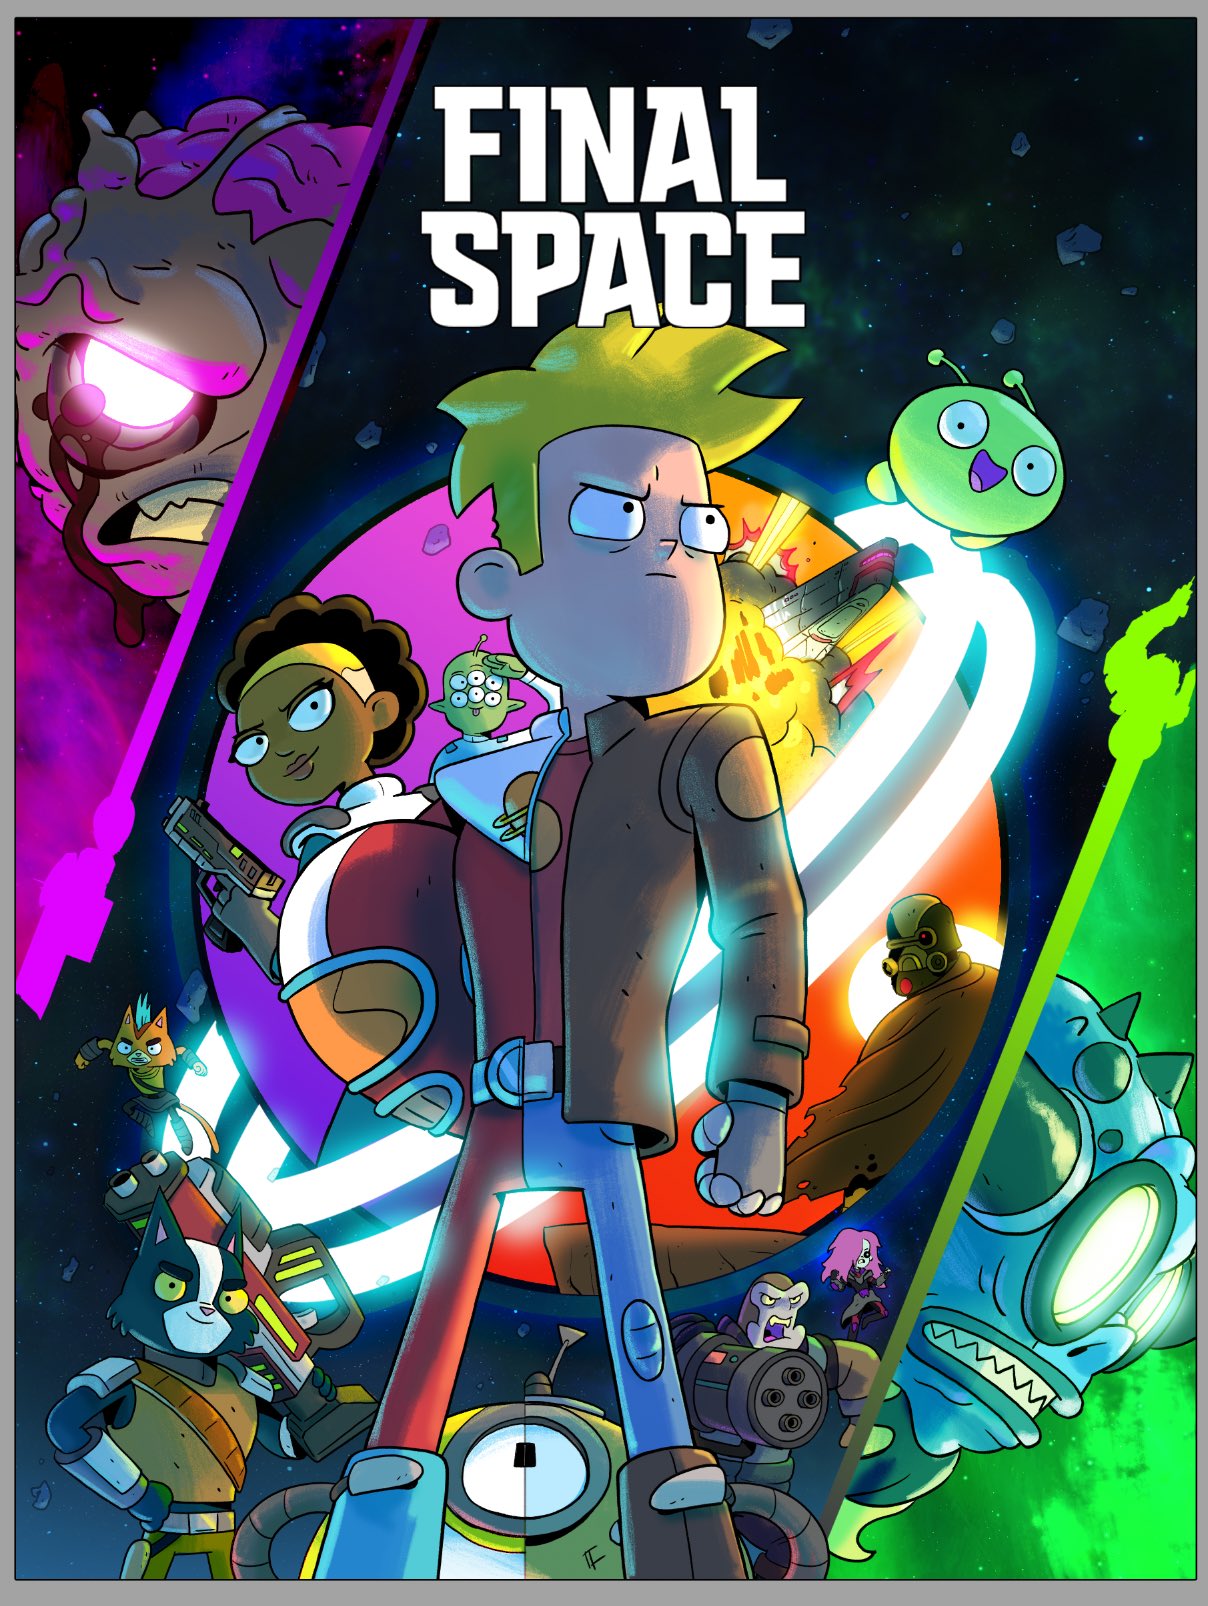 Final Space on Twitter: "S1 &amp; S2 BLU RAY Update. It's happening. Two  seasons in one box. It's (drum roll) Region Free/English version. We're  shooting for a summer release. @devinator200 is making